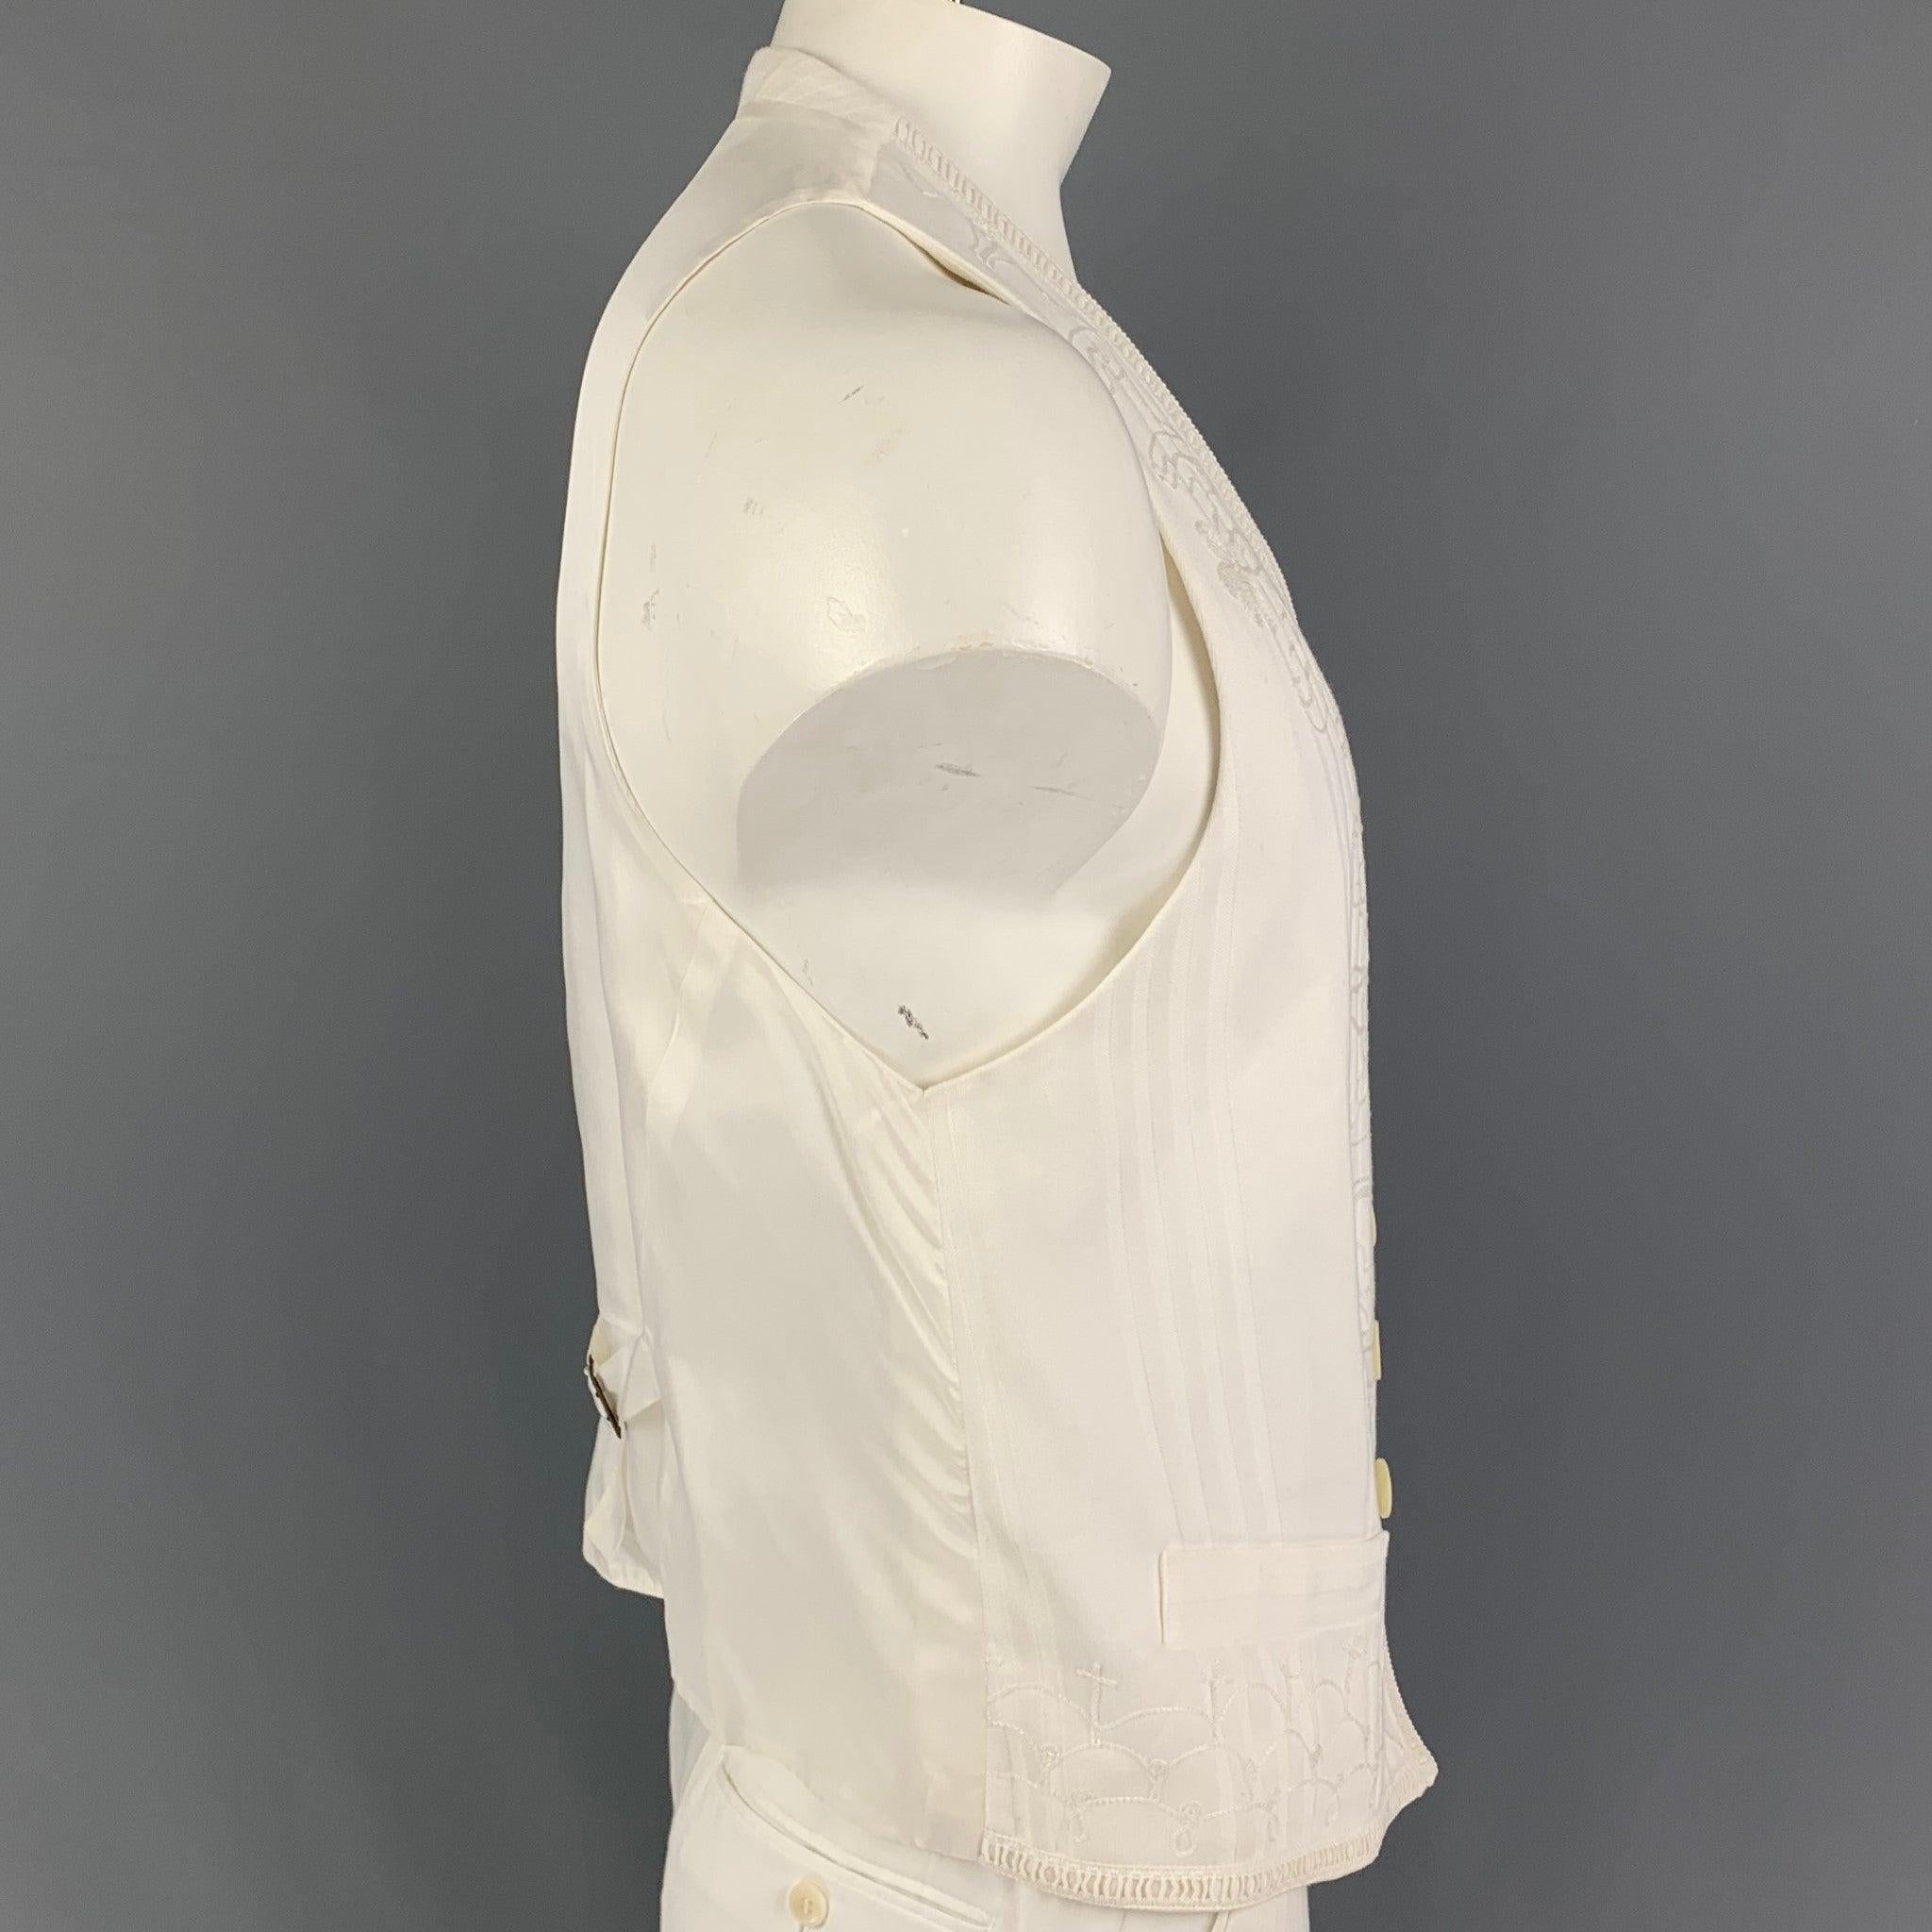 DOLCE & GABBANA vest comes in a white cotton featuring embroidered designs, adjustable back strap, slit pockets, and a buttoned closure. Made in Italy.
Very Good
Pre-Owned Condition. Fabric tag removed.  

Marked:   Size tag removed 

Measurements: